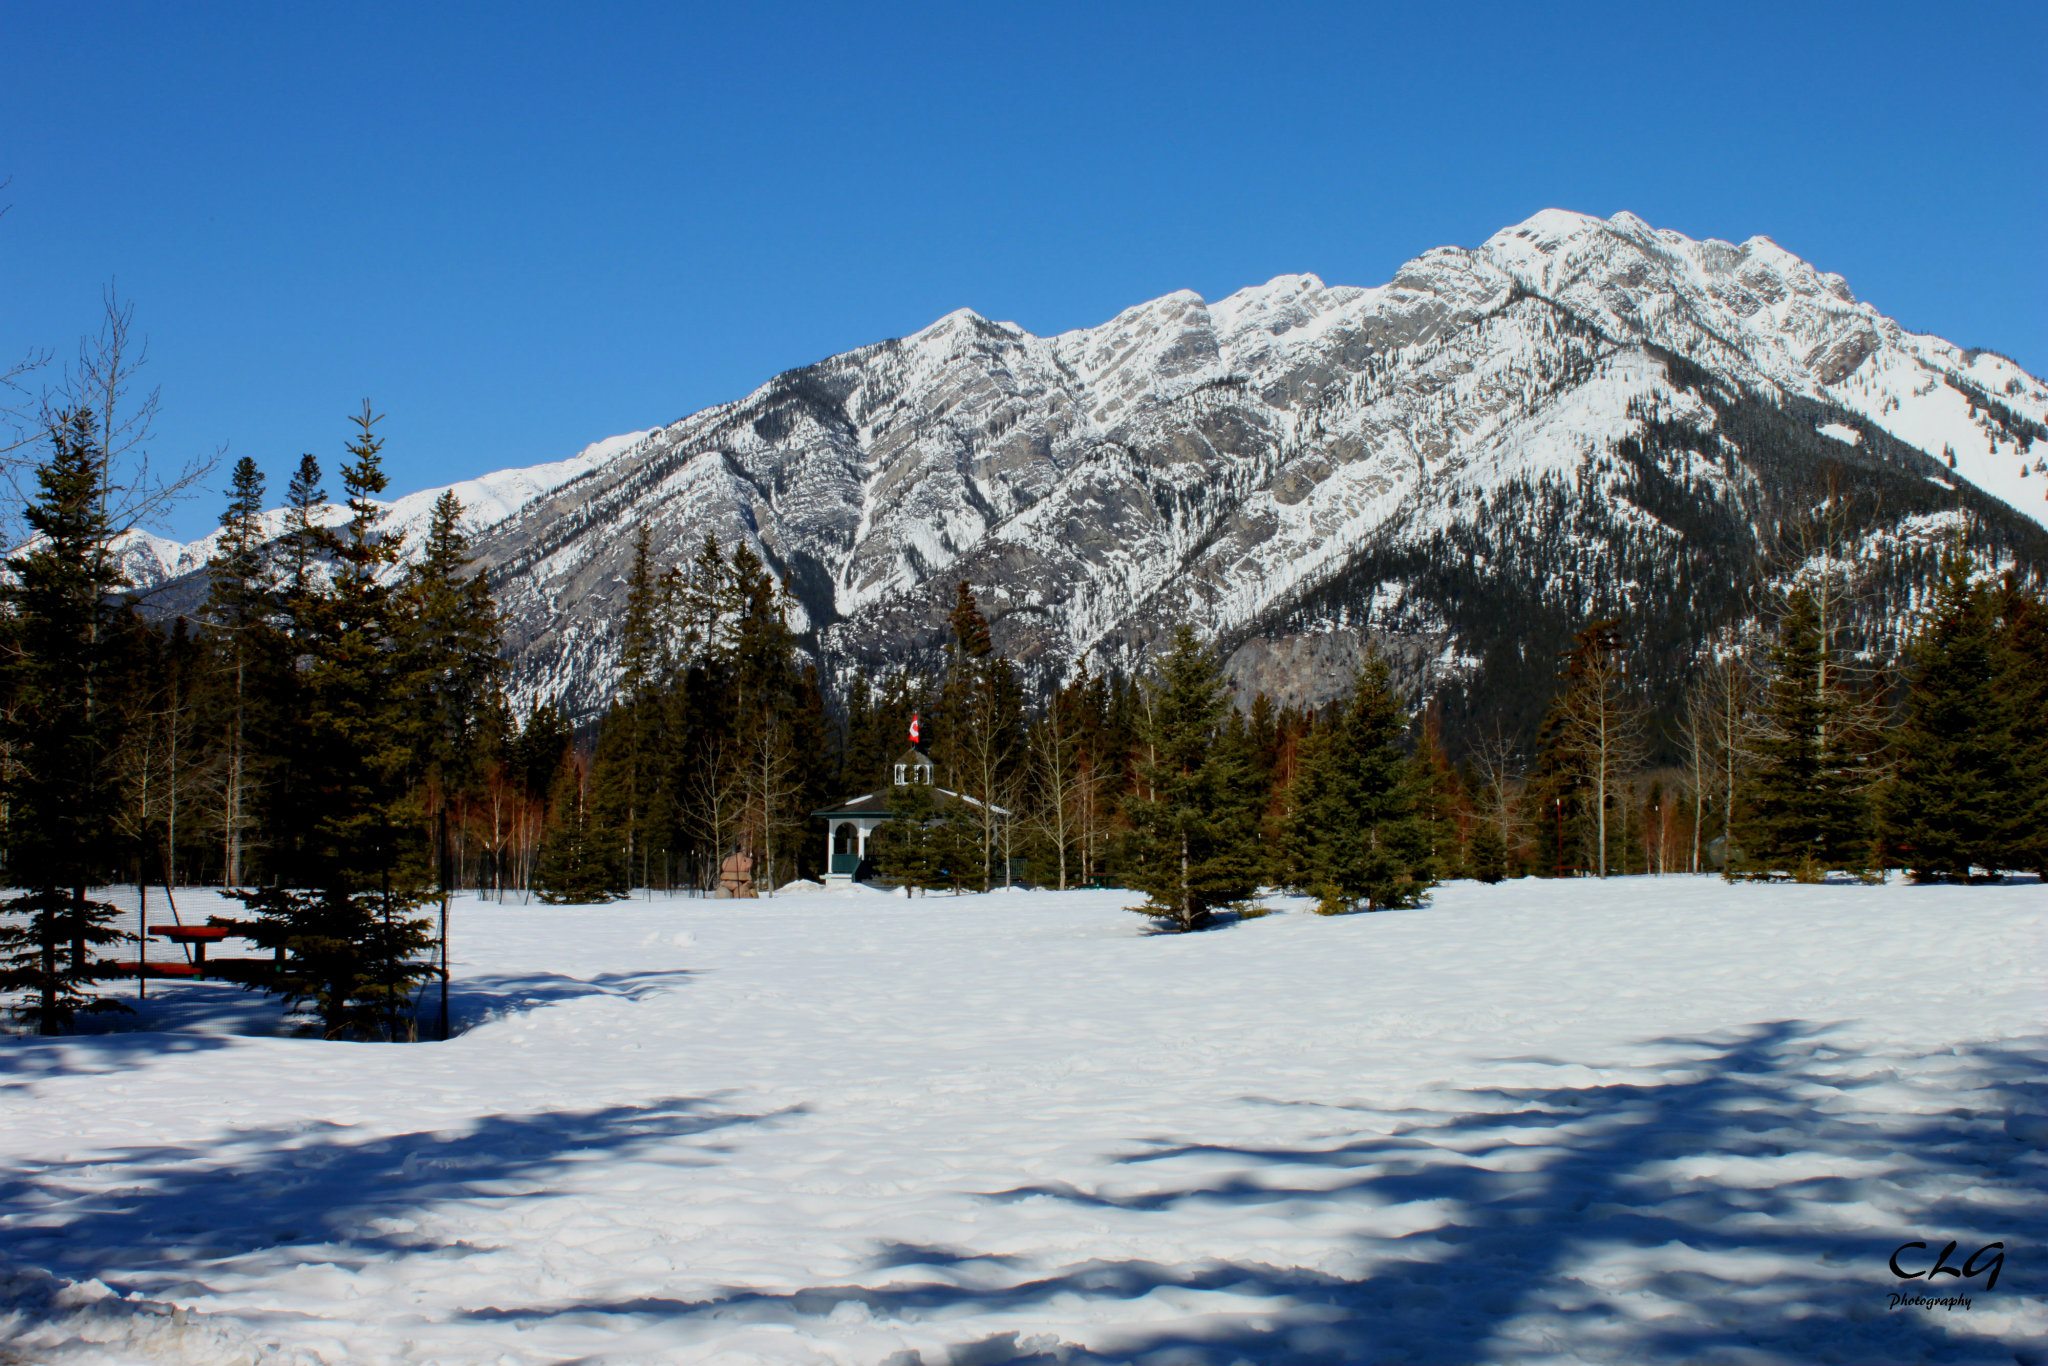 My photography - Banff mountains